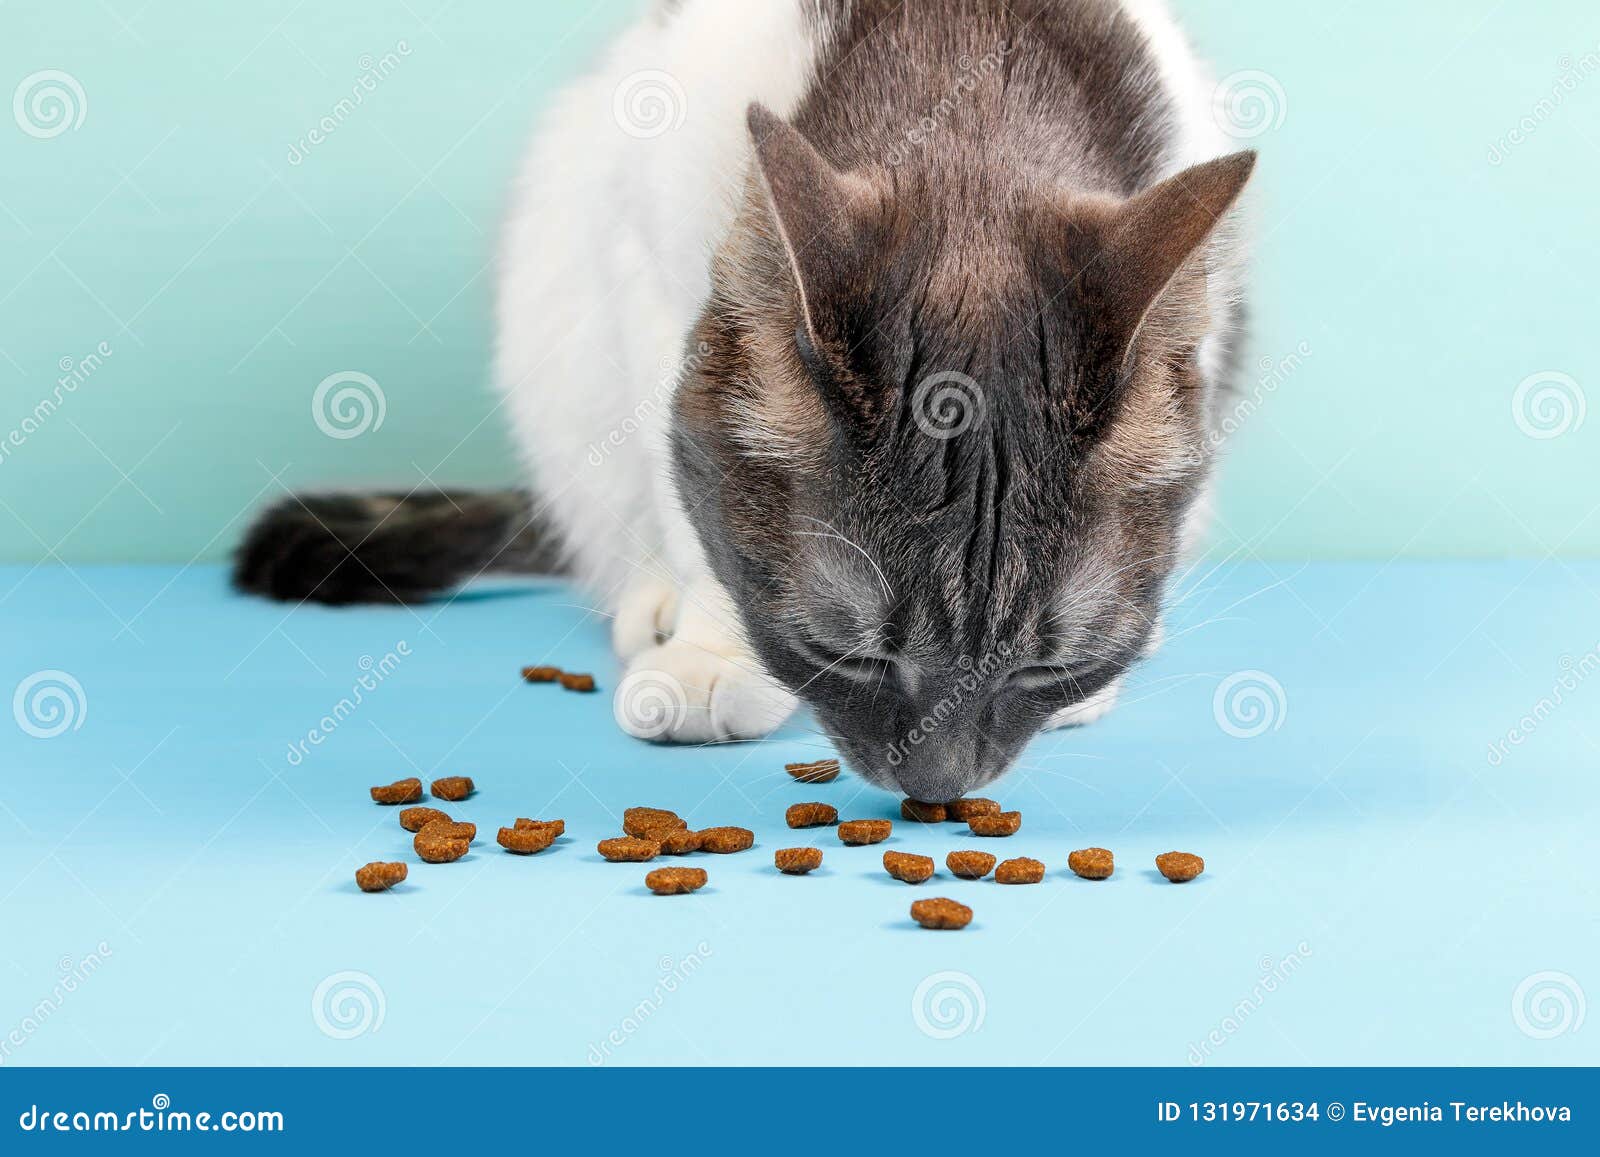 Cat Eats Dry Food. Cat Food In The Shape Of A Heart Stock Photo Image